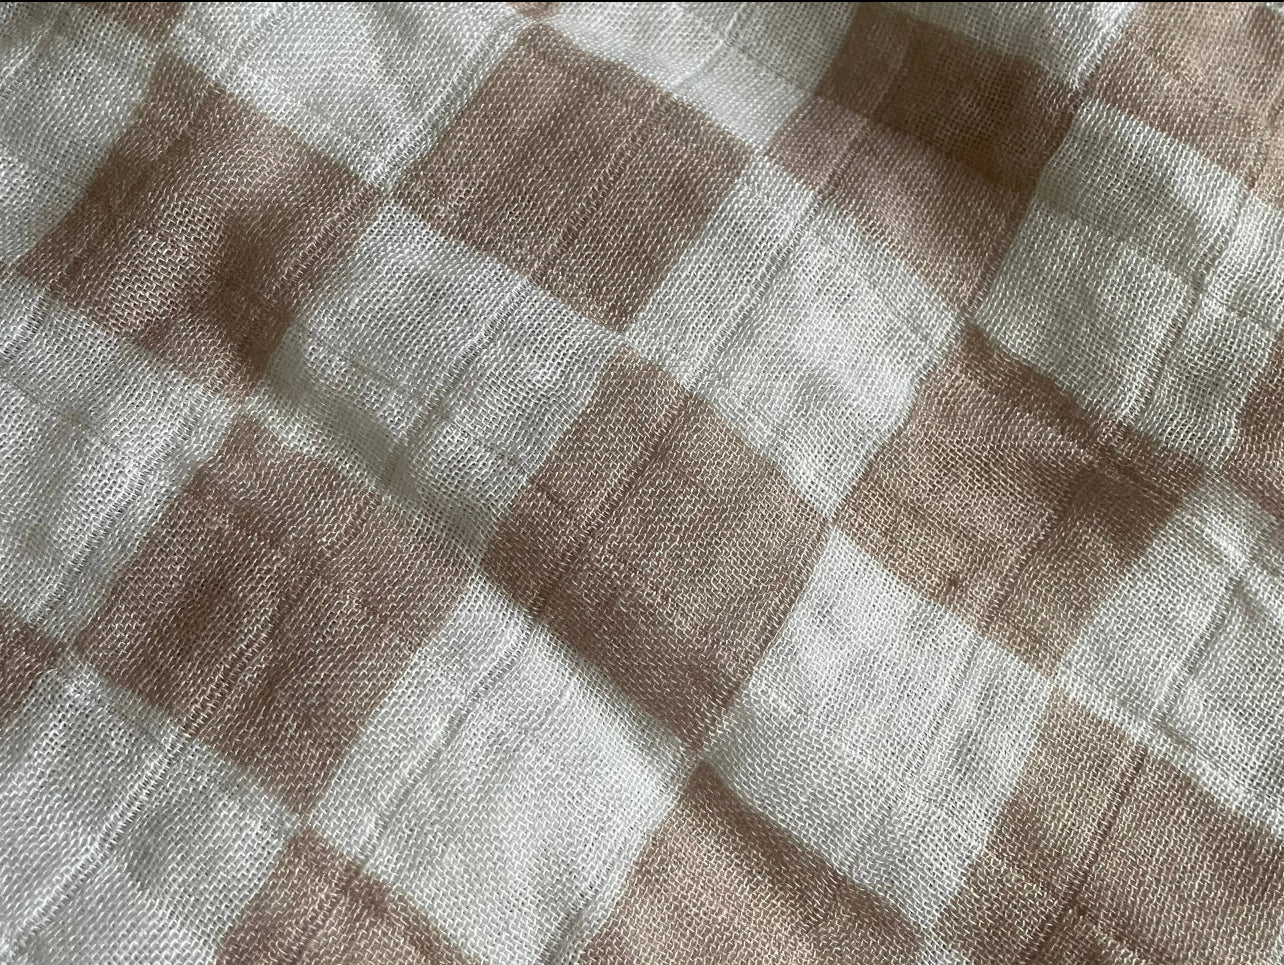 Checkered print muslin swaddle